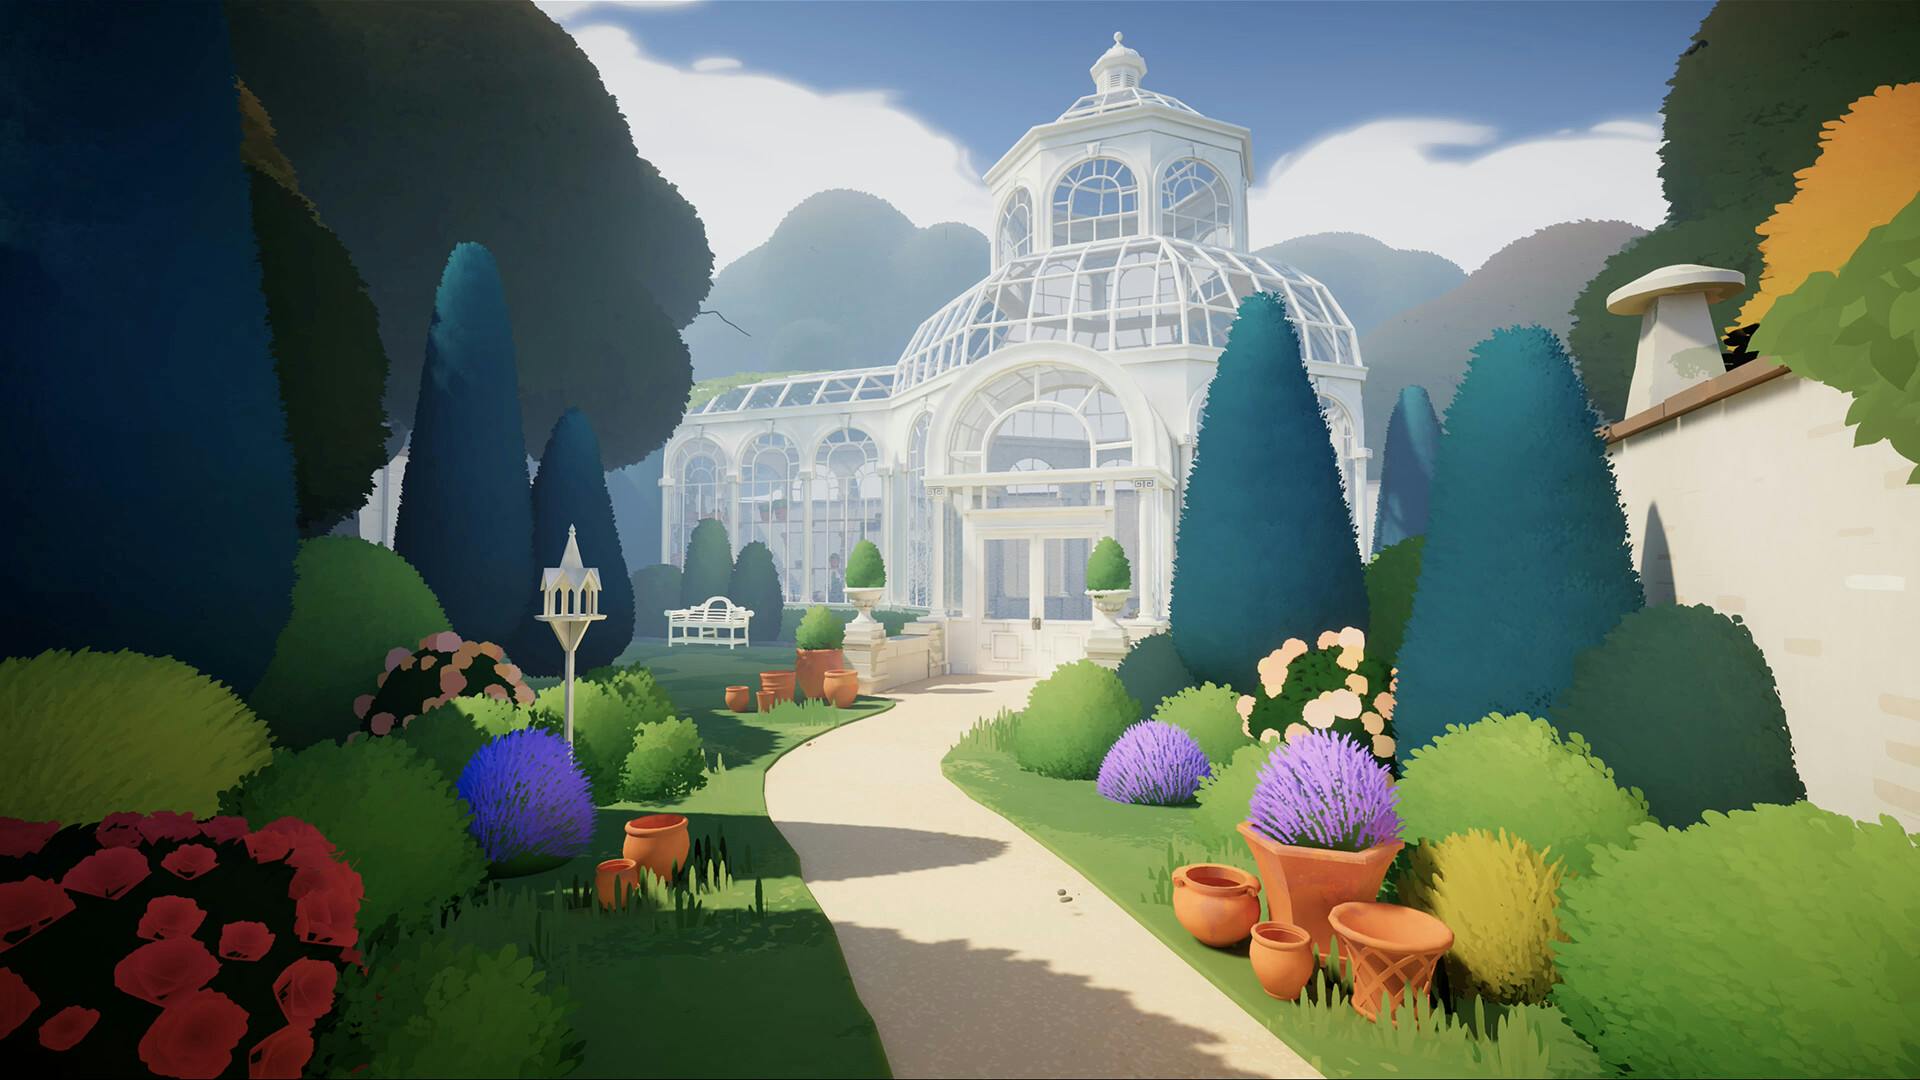 Botany Manor landscape. You can see a greenhouse ahead.